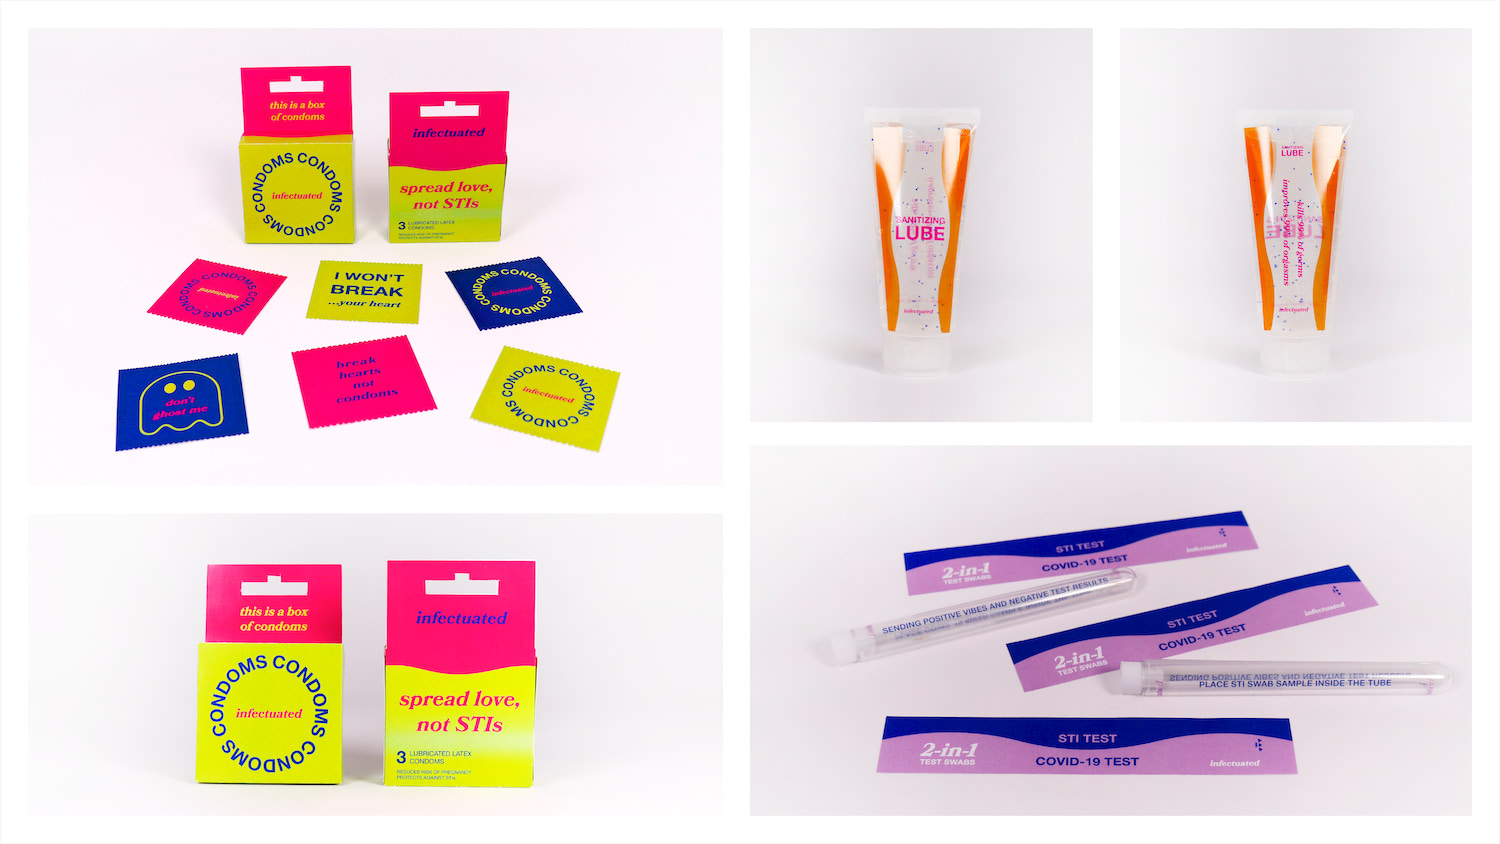 CASUAL-19 Products: condoms, sanitizing lube, and 2-in-1 COVID-19 / STI test swabs